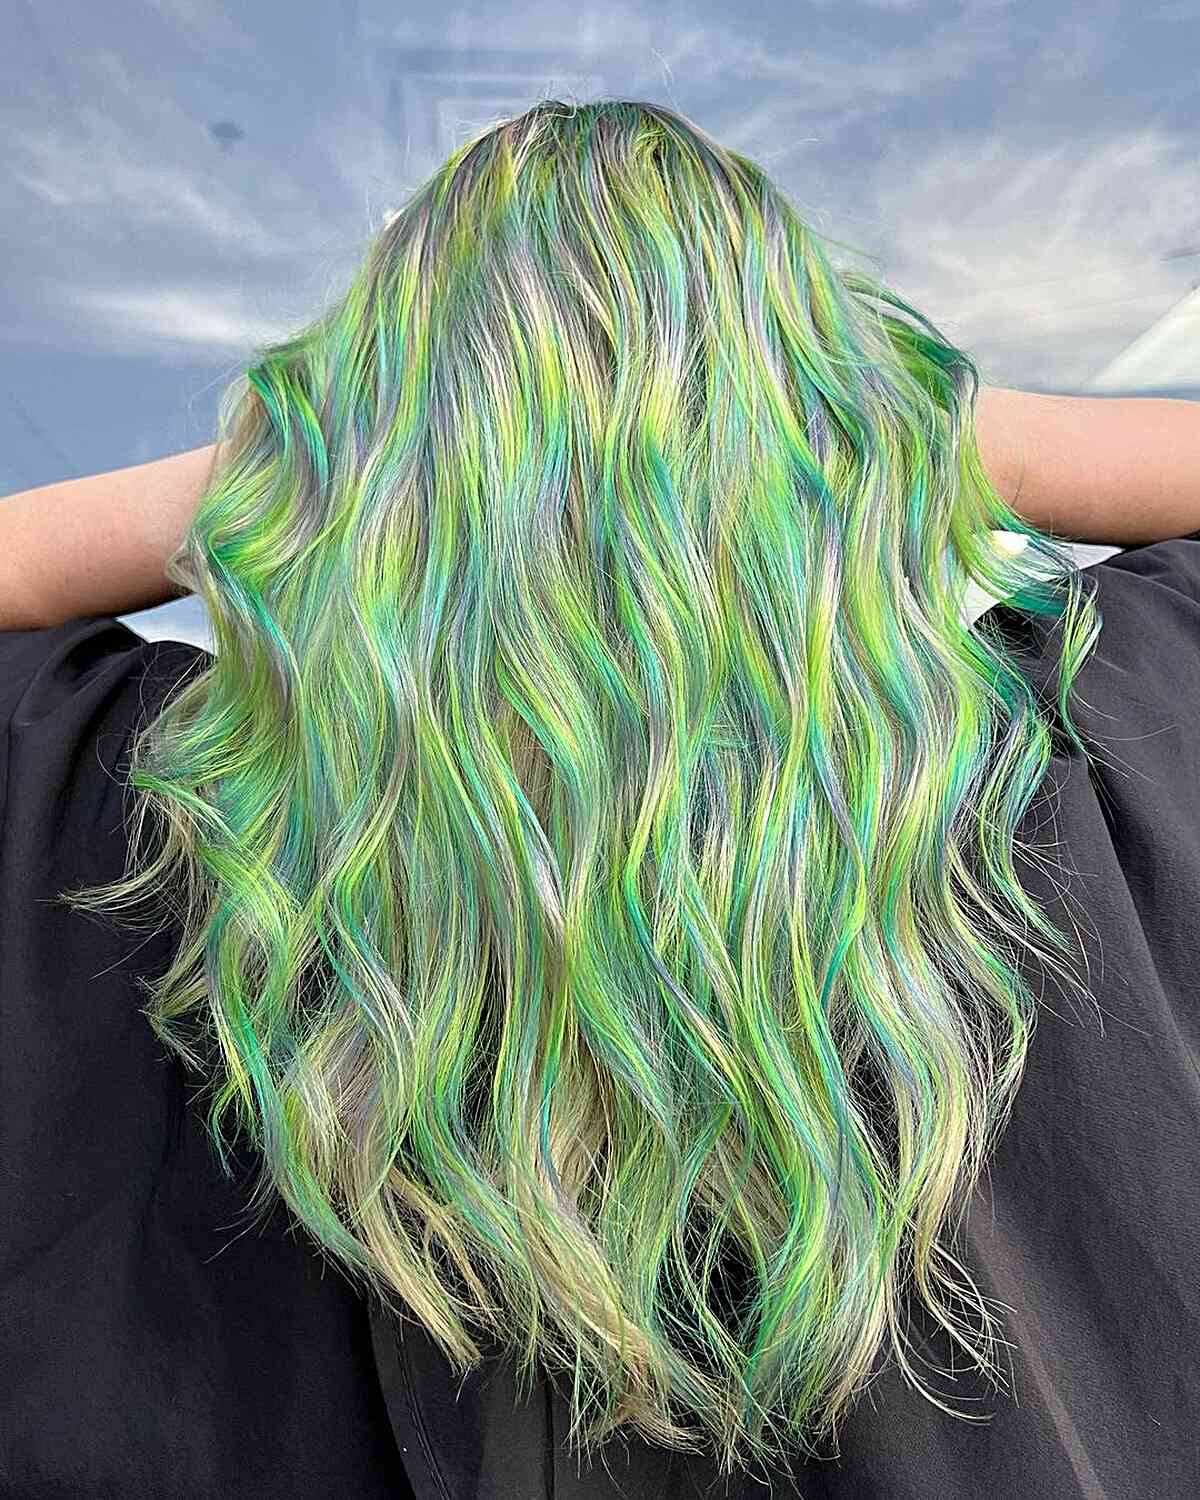 Amazing Prism Green Hair with hints of blonde